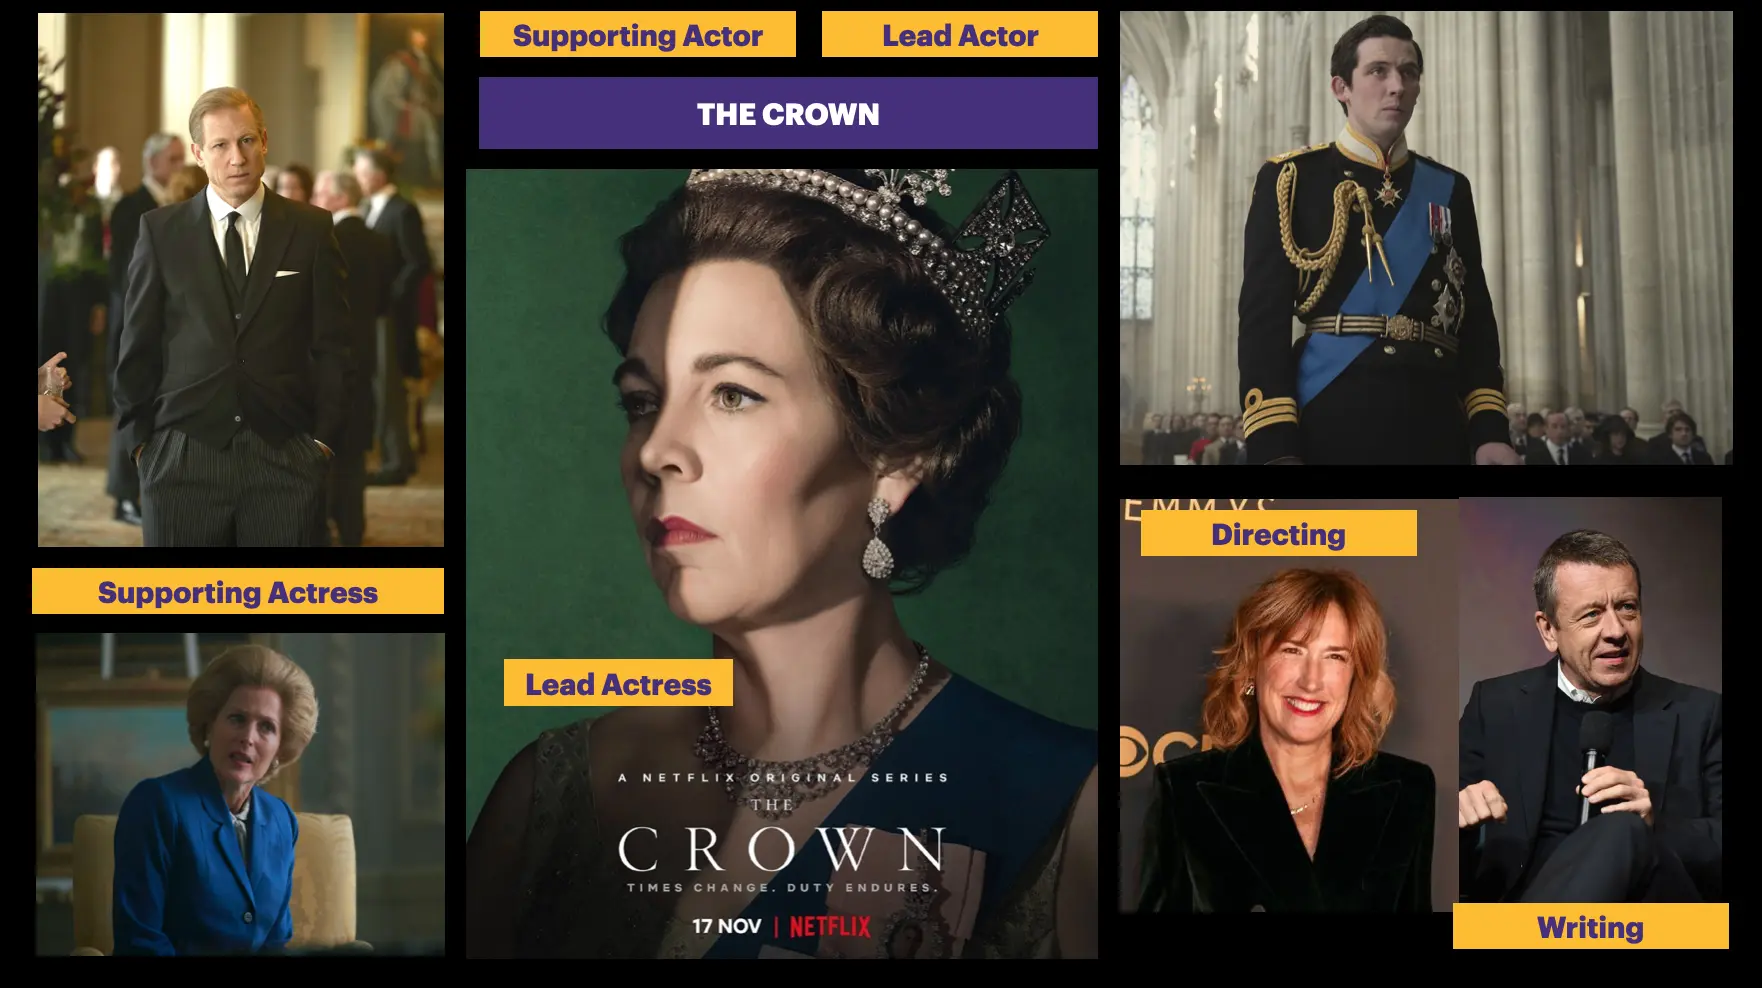 The crown has won all related categories in the drama series category in 2021 emmy's award.